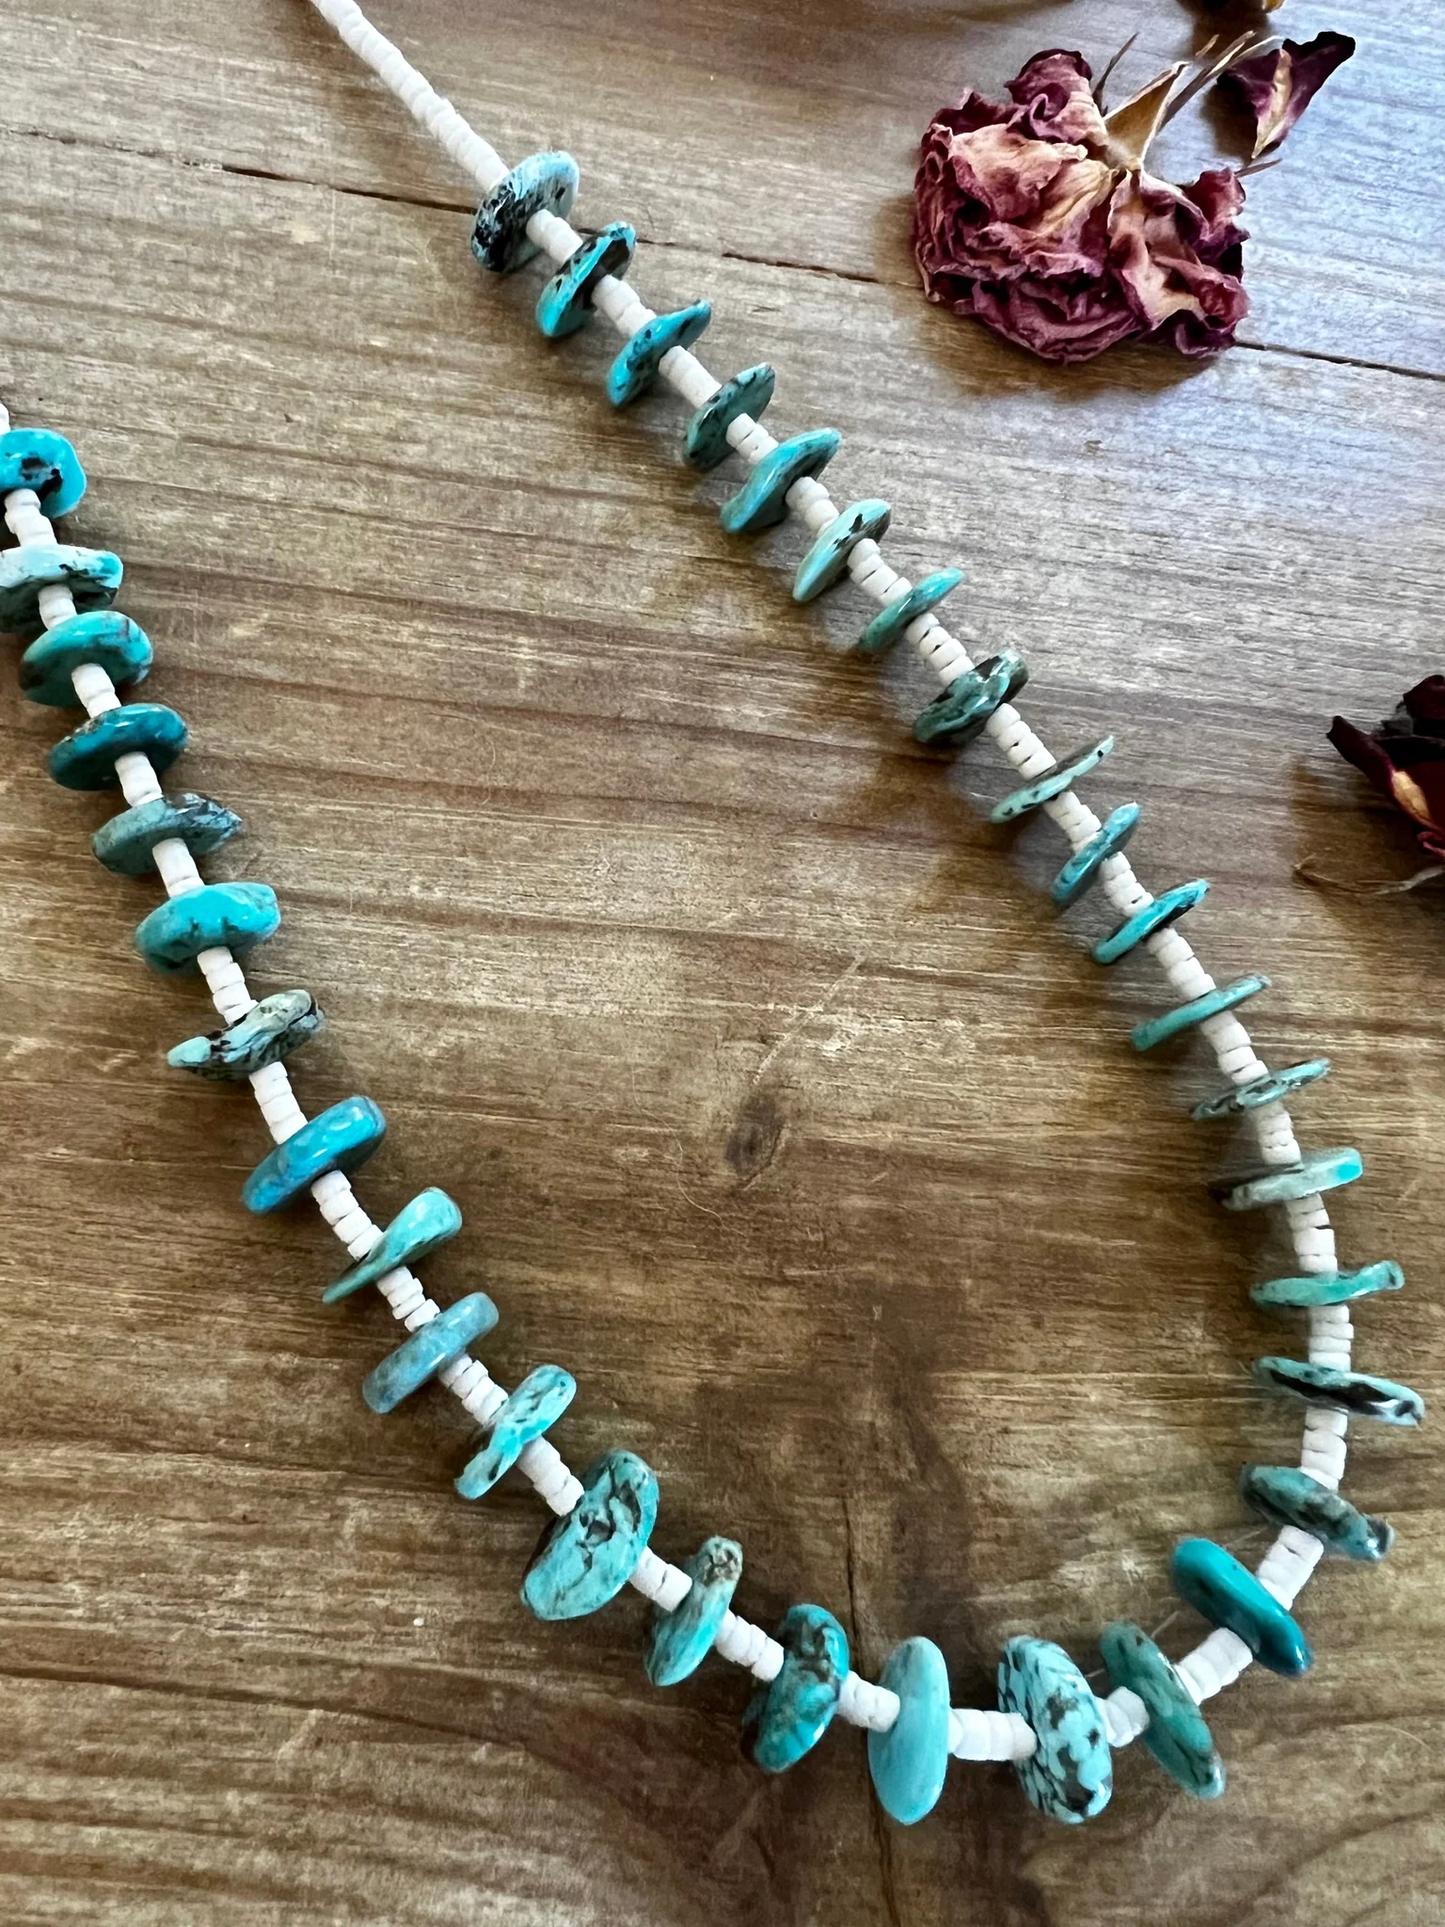 The Shakunt Turquoise Necklace